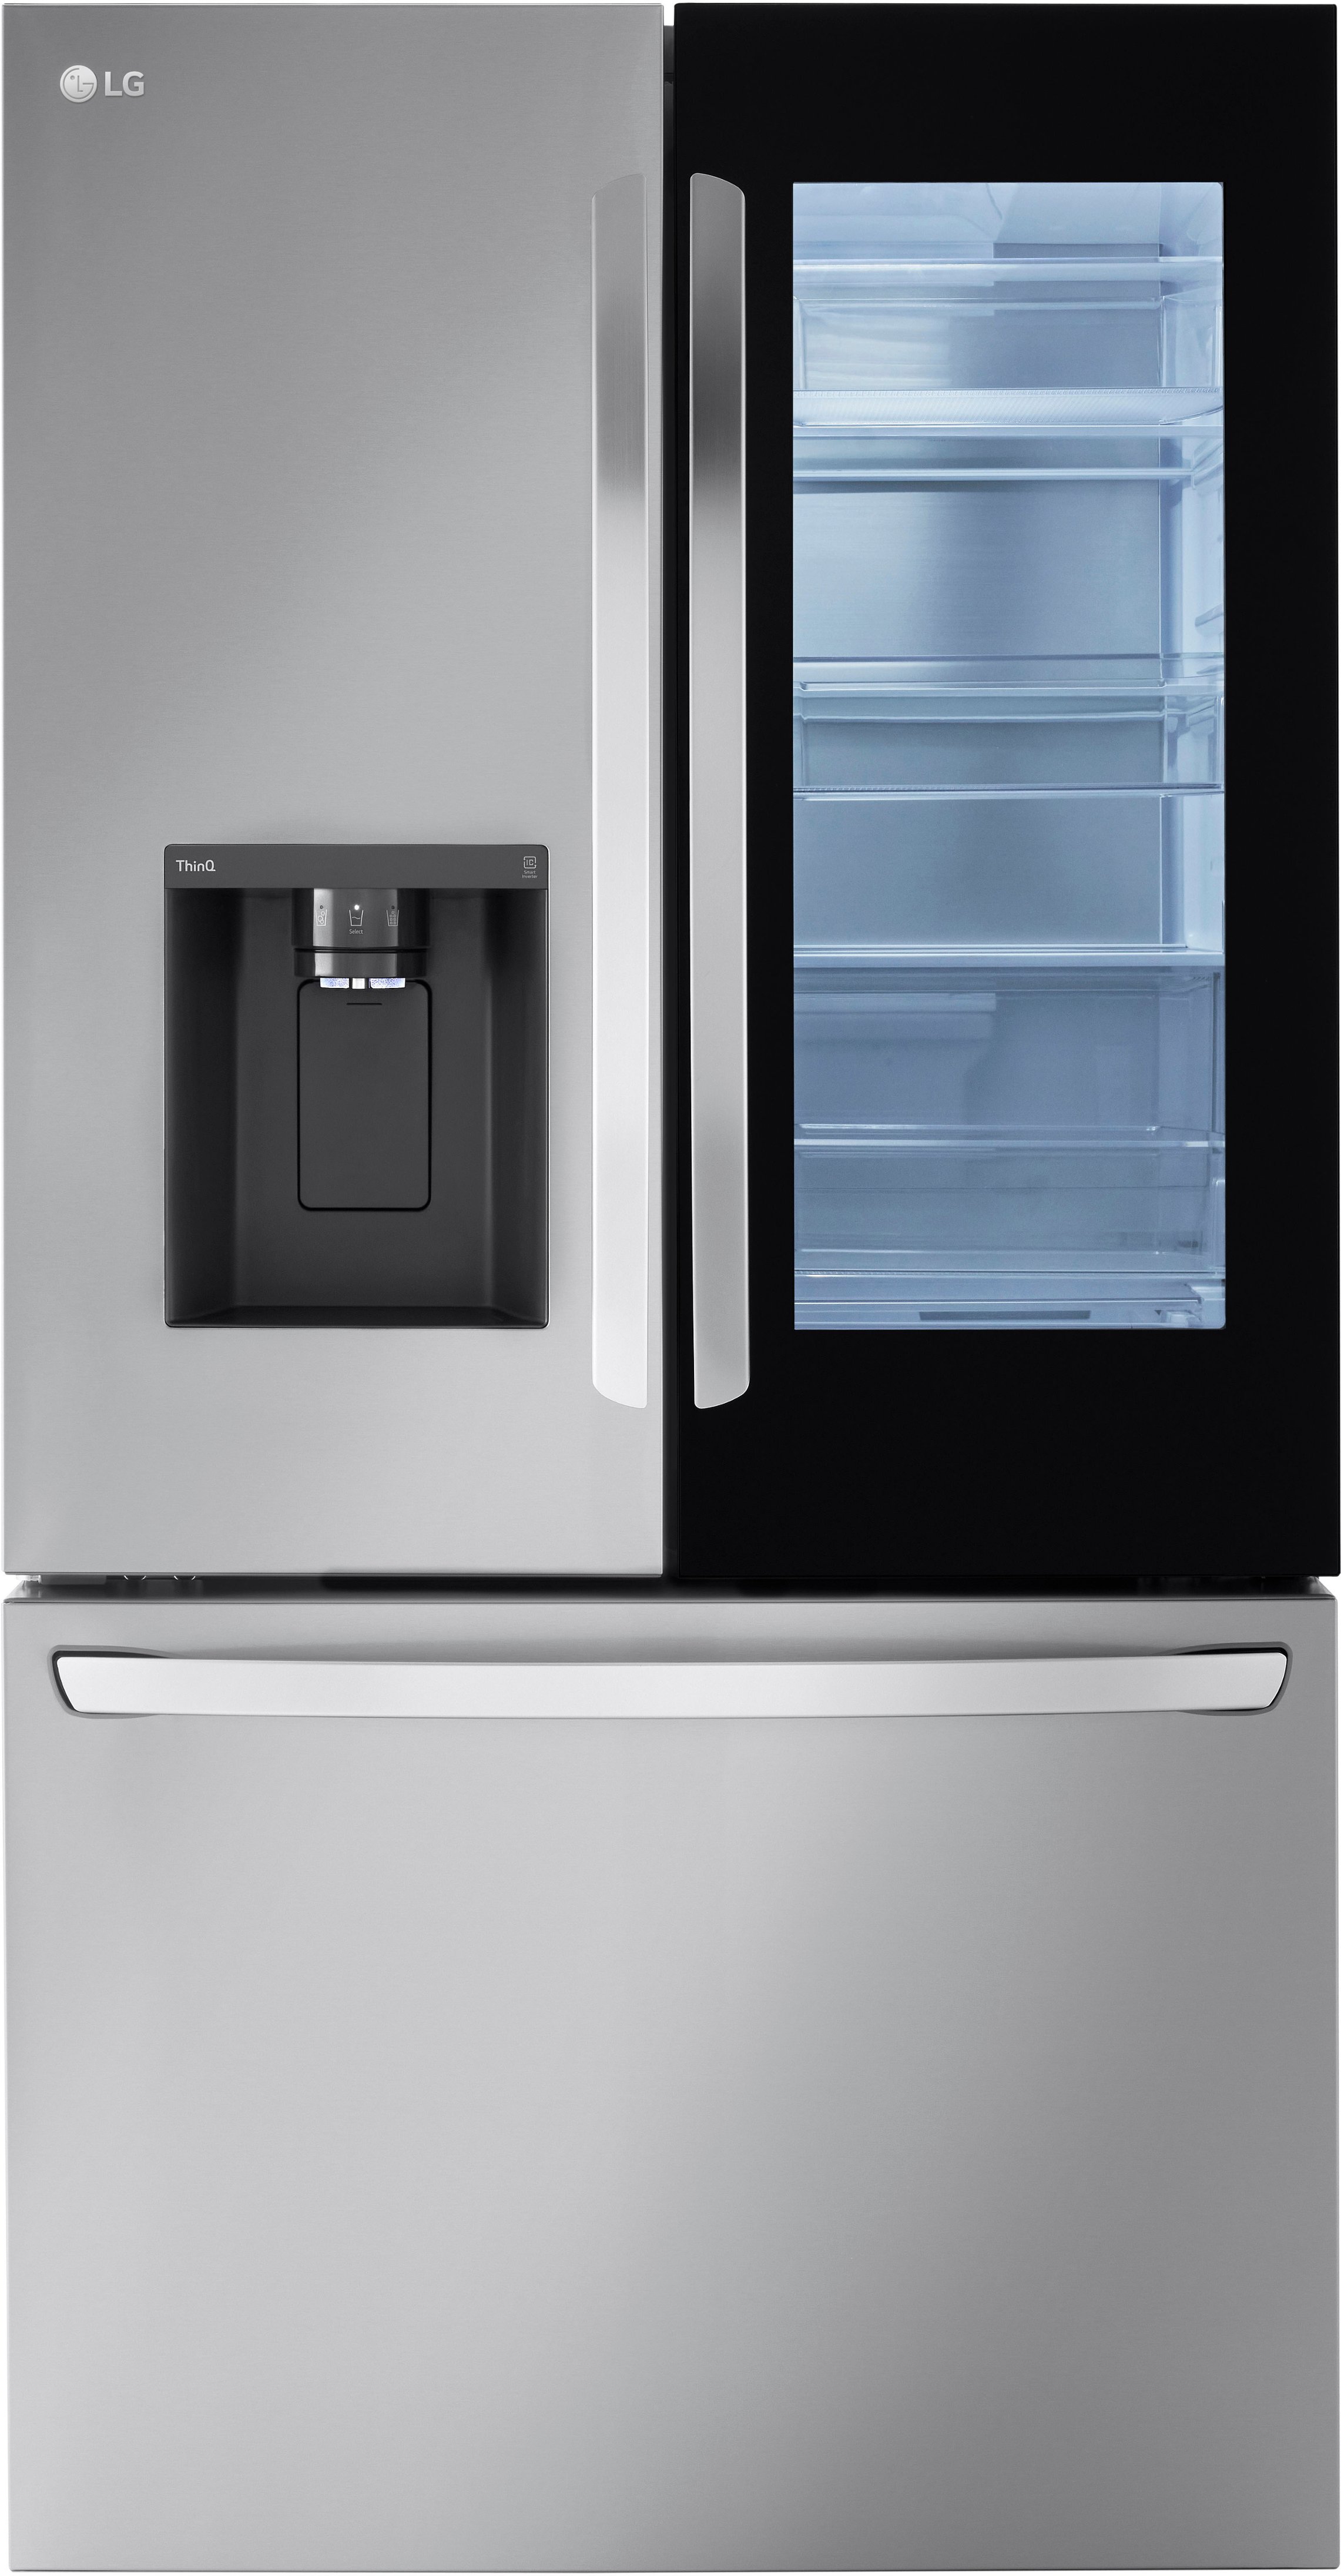 LG 26 Cu. ft. Smart InstaView Counter-Depth Max French Door Refrigerator - Stainless Steel